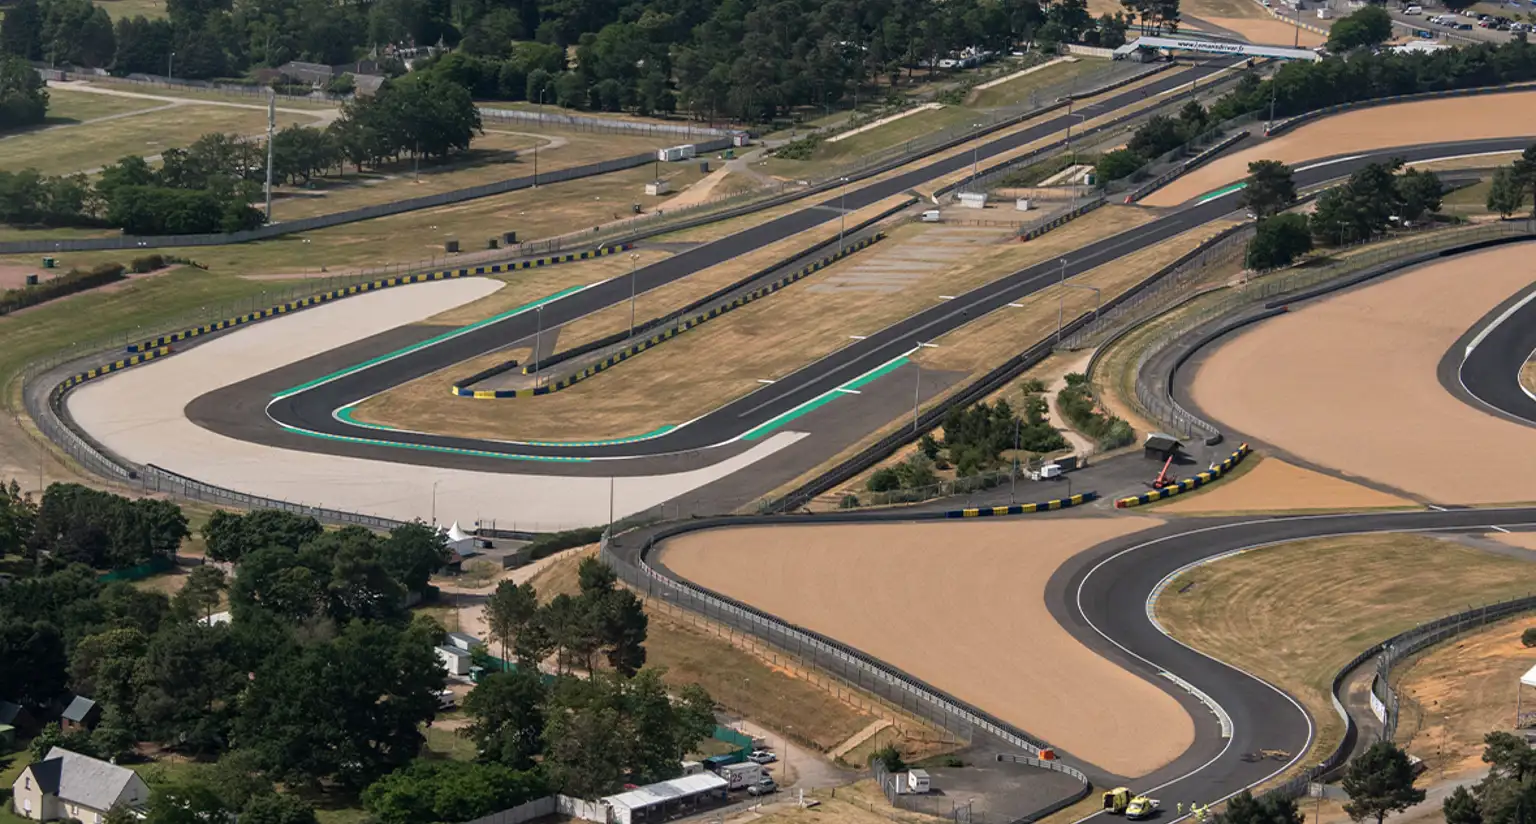 The Complete Guide to Le Mans